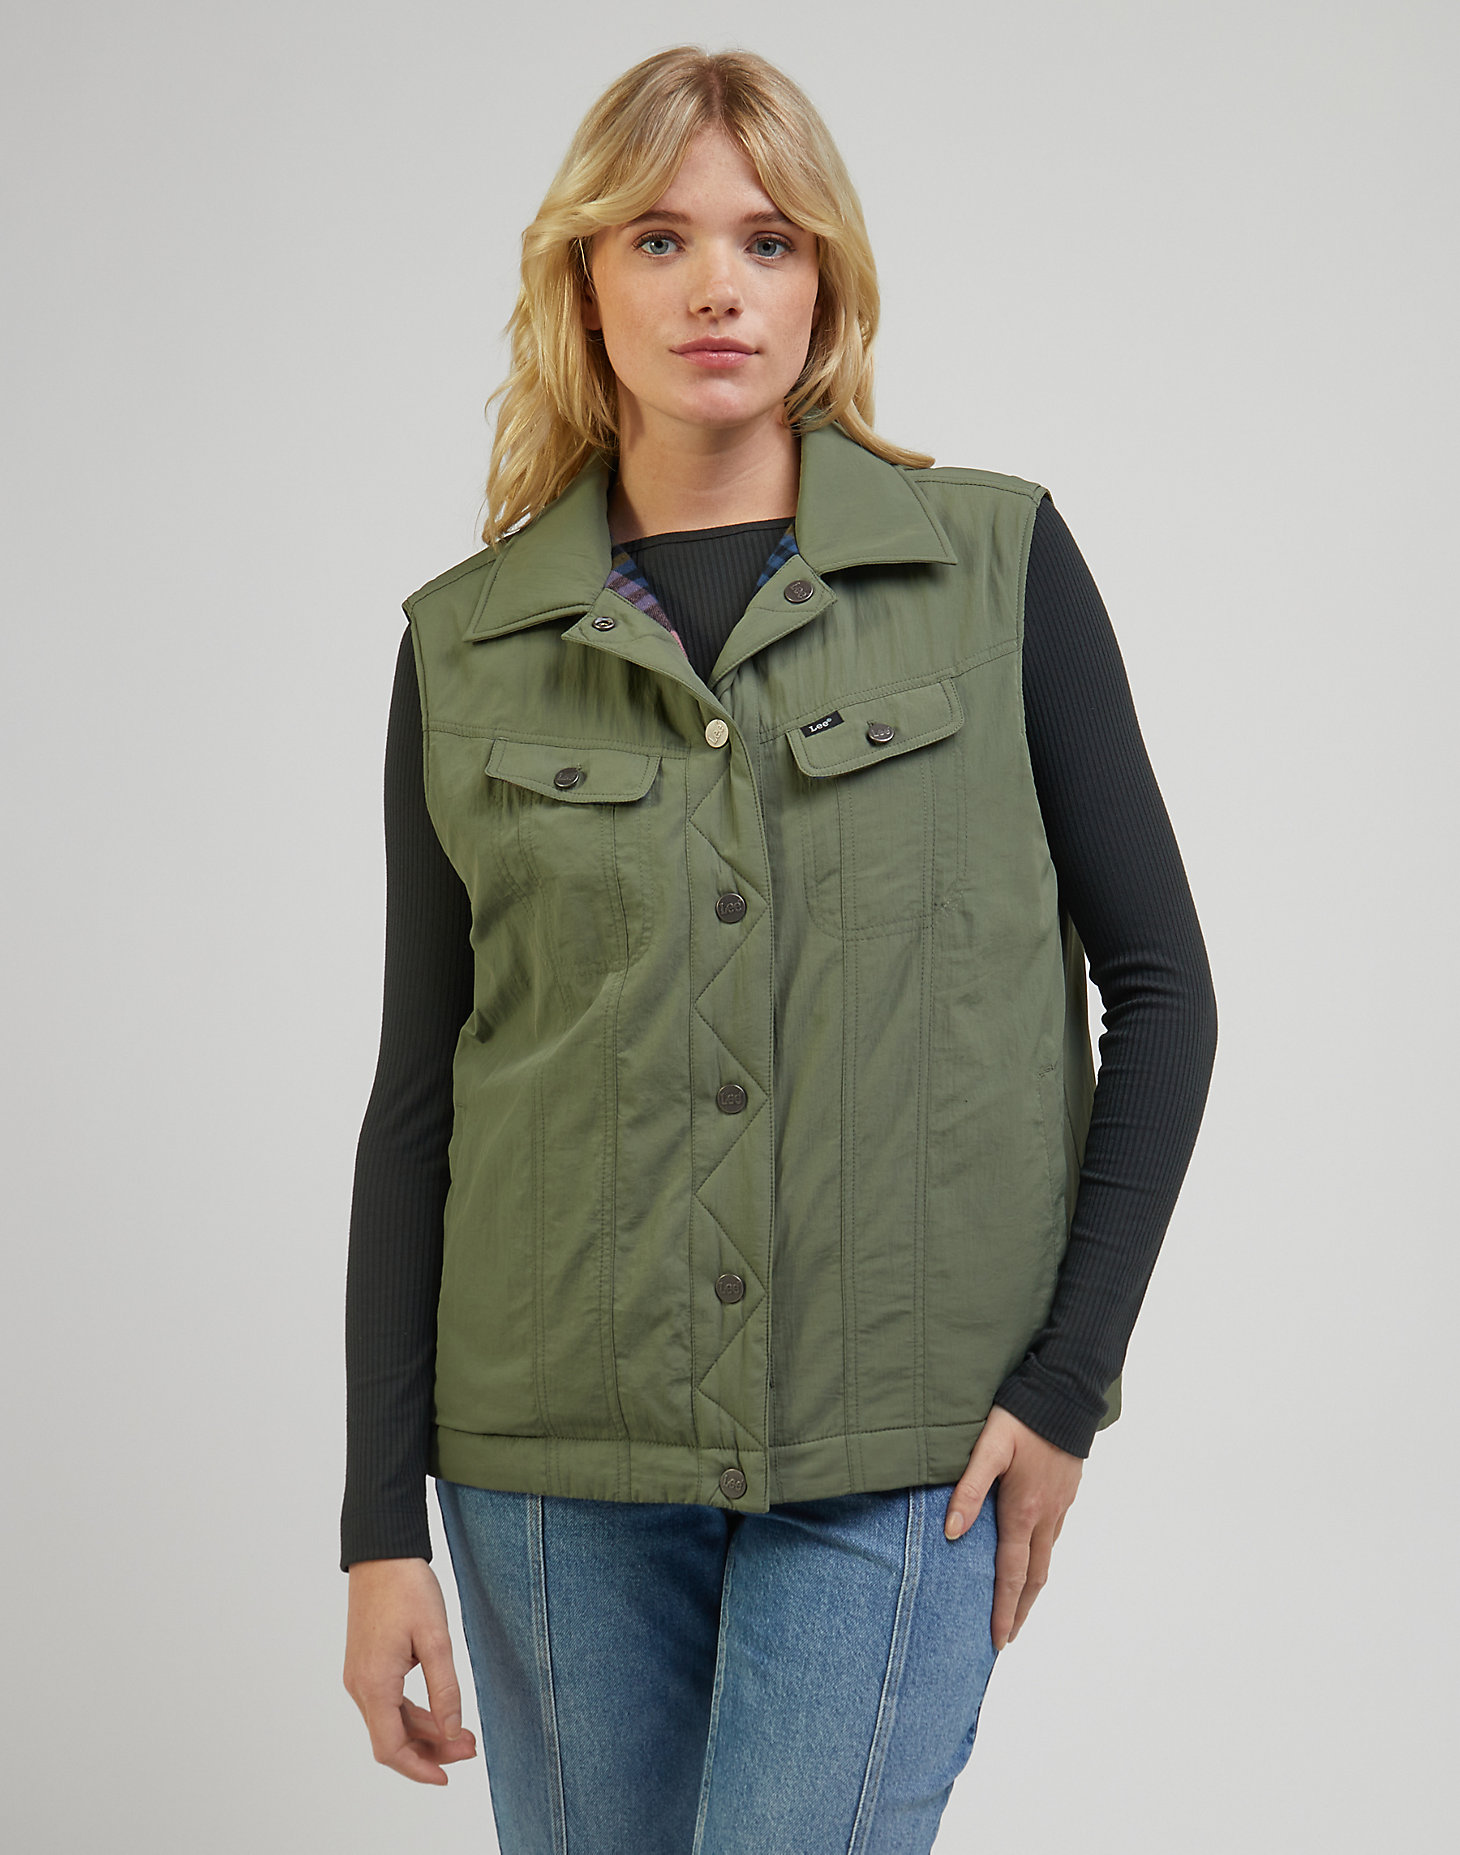 Padded Rider Vest in Olive Grove main view